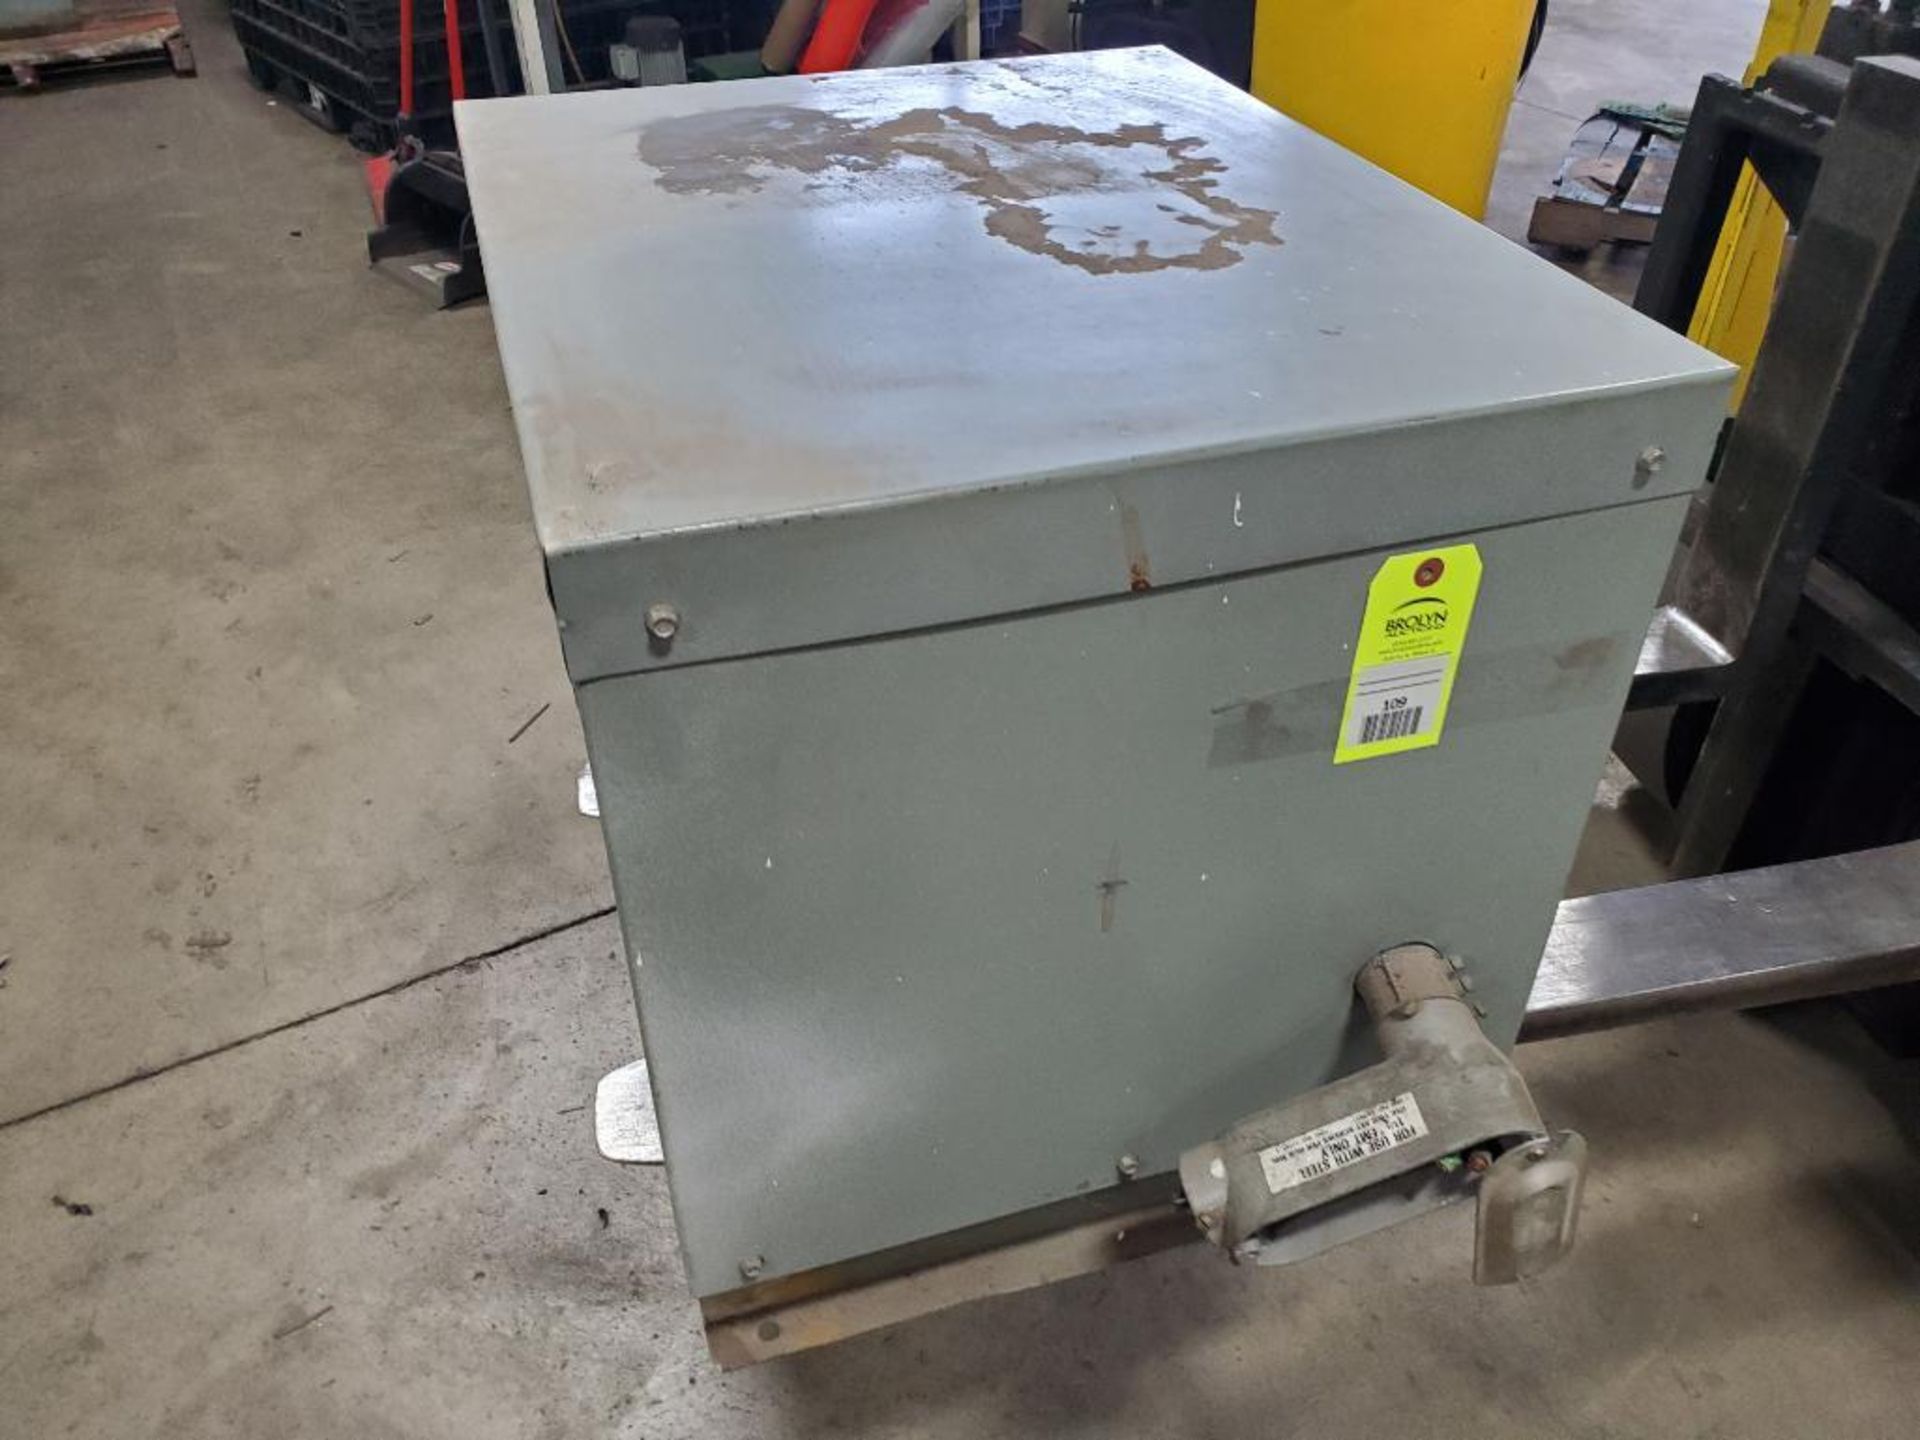 30kVa Acme Transformer. Catalog number T-1A-53312-35. Primary 480v. Secondary 208Y/120. - Image 6 of 11